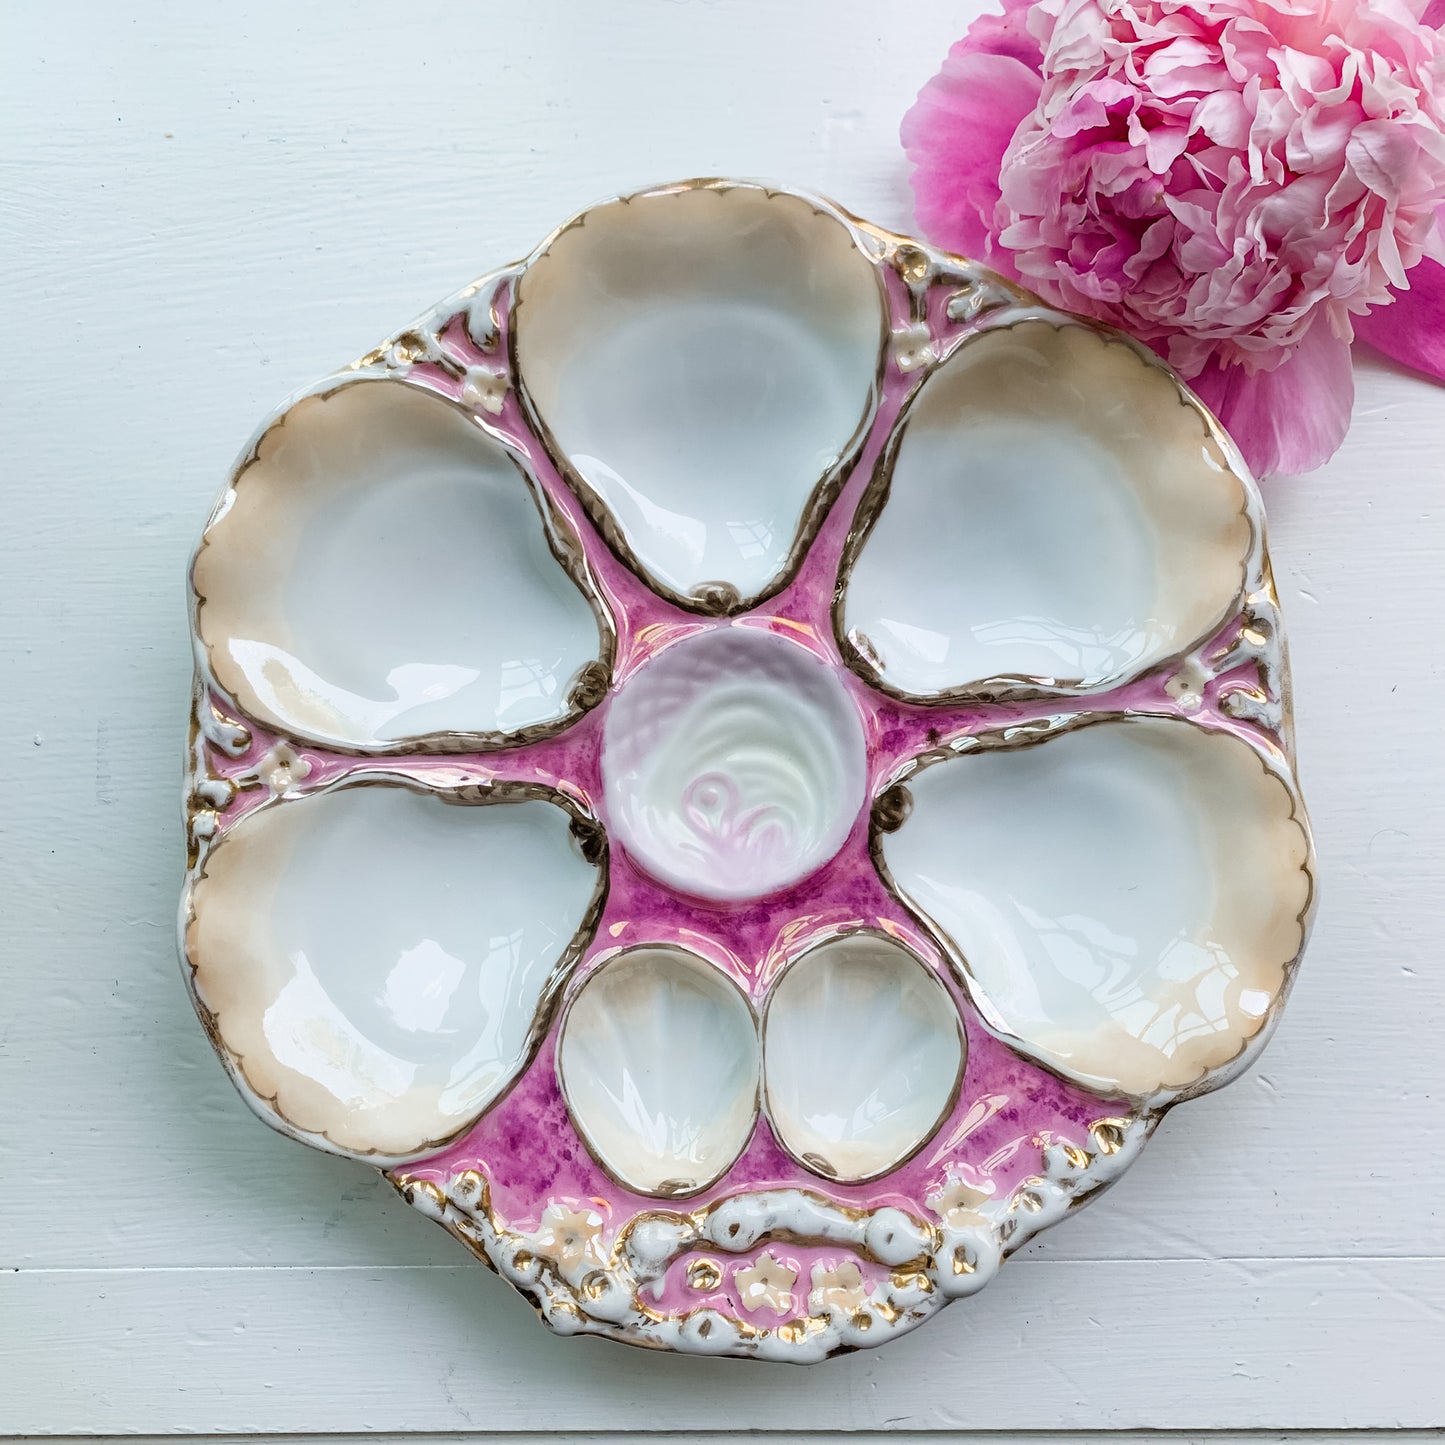 First Antique Pink 1860 Bavarian Oyster Plate